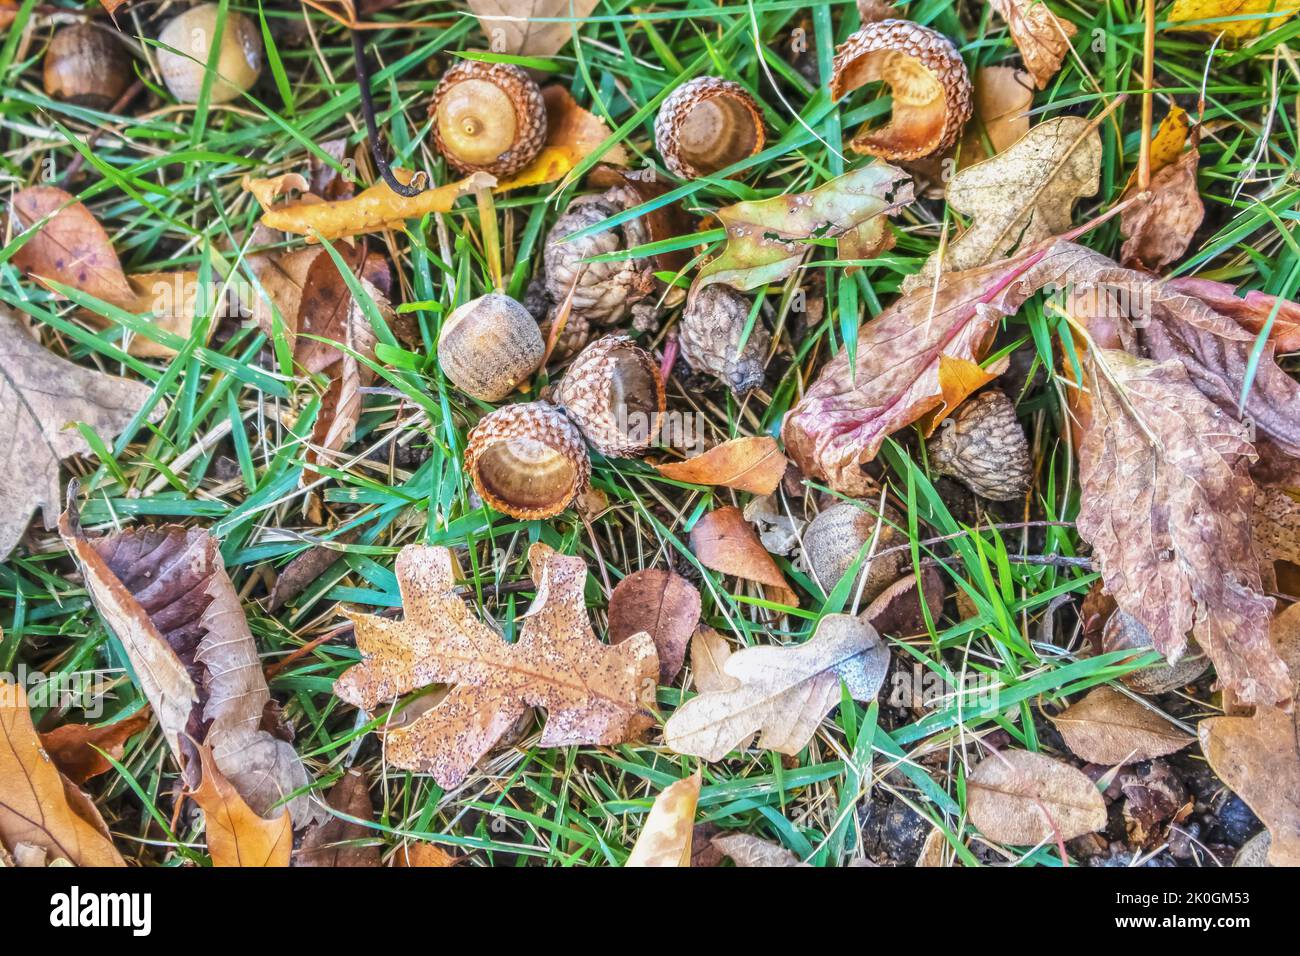 Background of acorns and fall leaves on ground with sprigs of green grass Stock Photo